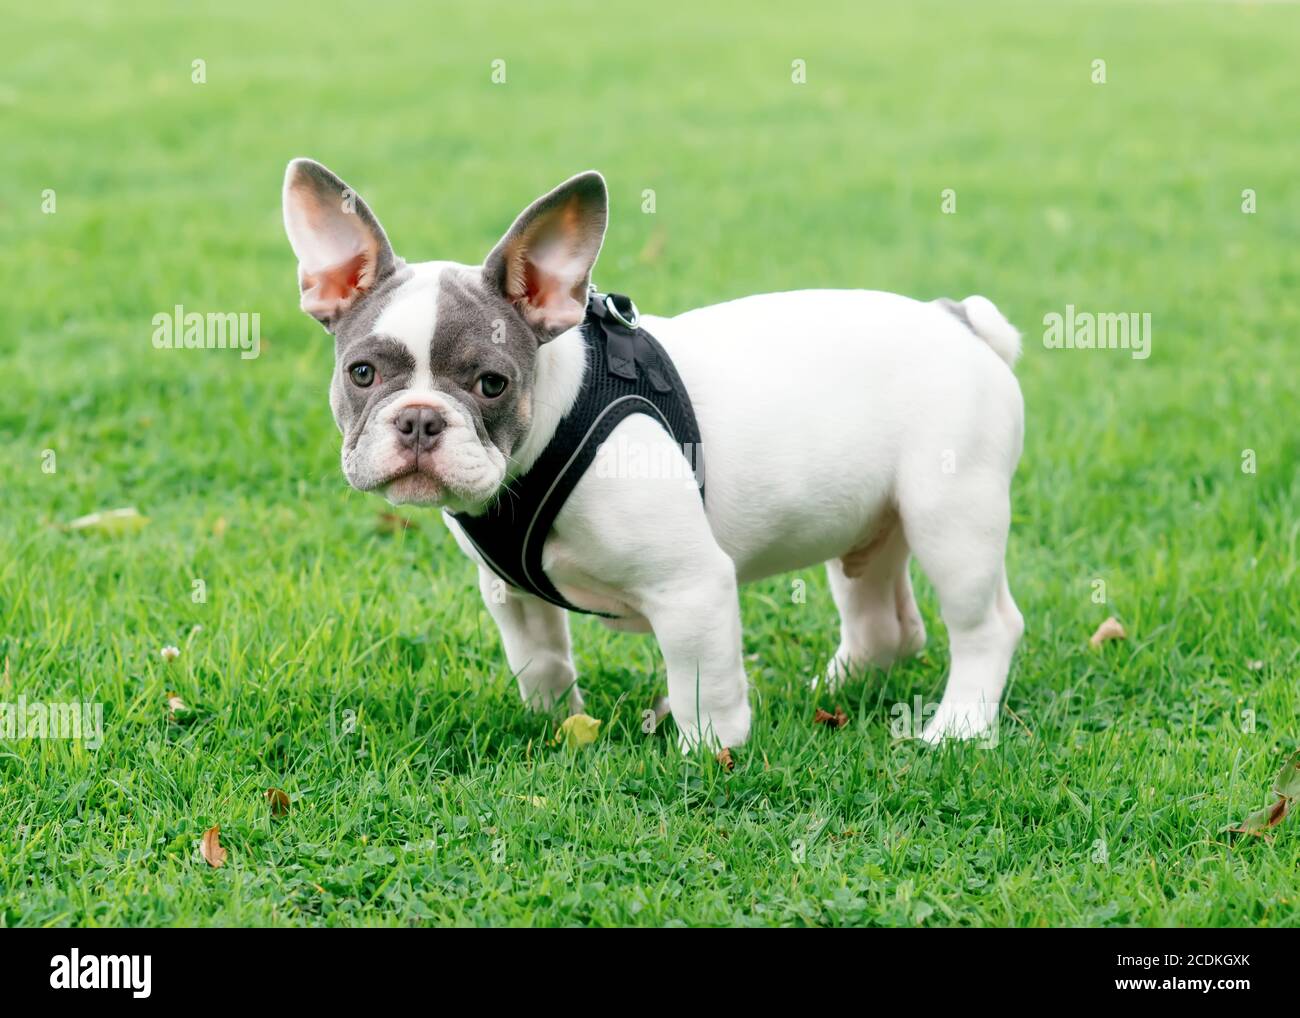 Puppy of White French Bulldog out for a walk standing on the grass in Summer Stock Photo